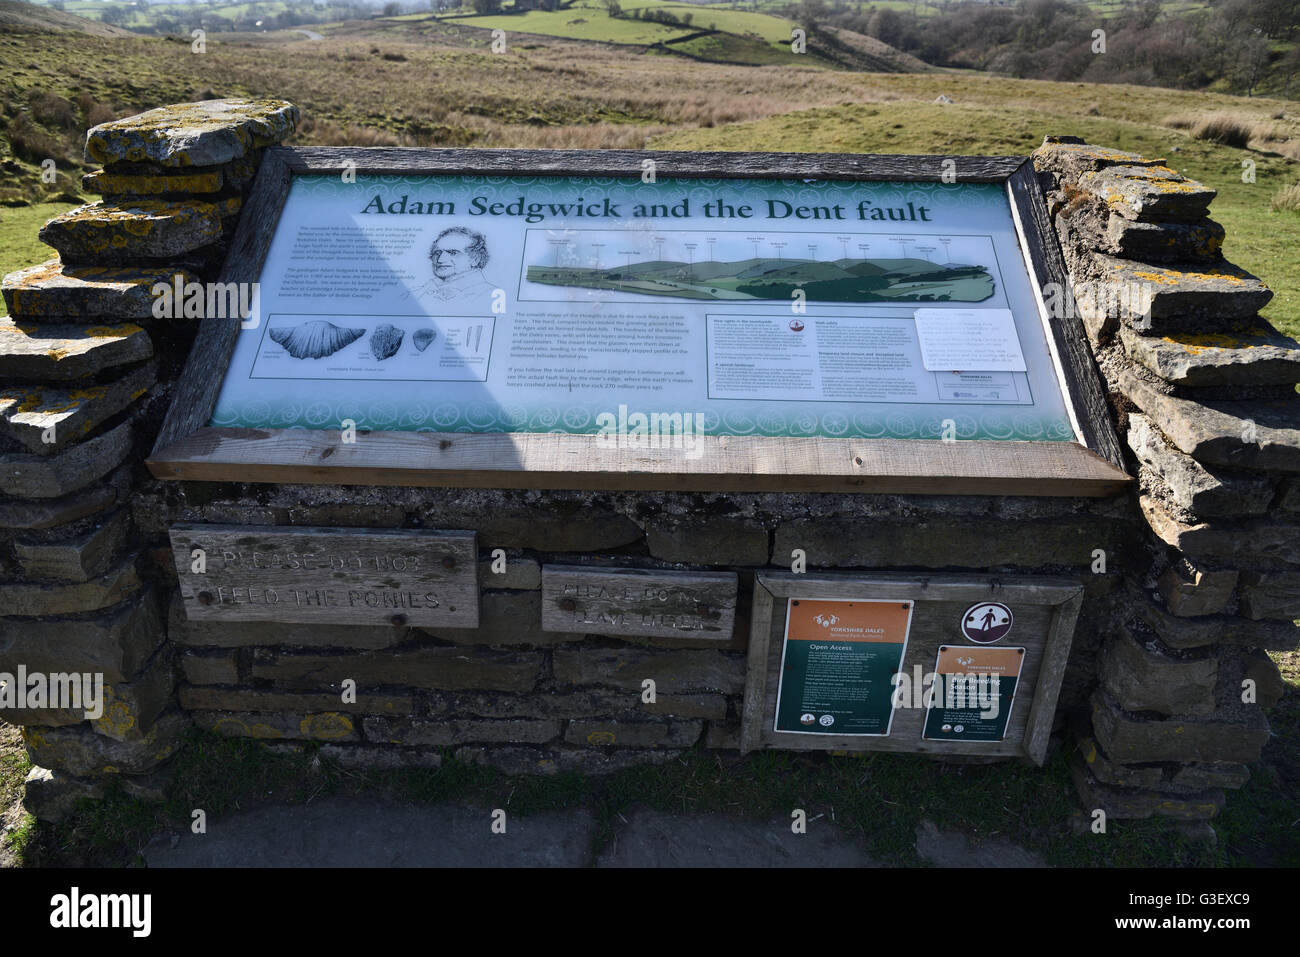 Adam Sedgwick, and the Dent Fault information board, Yorkshire Dales National Park, England UK. Stock Photo